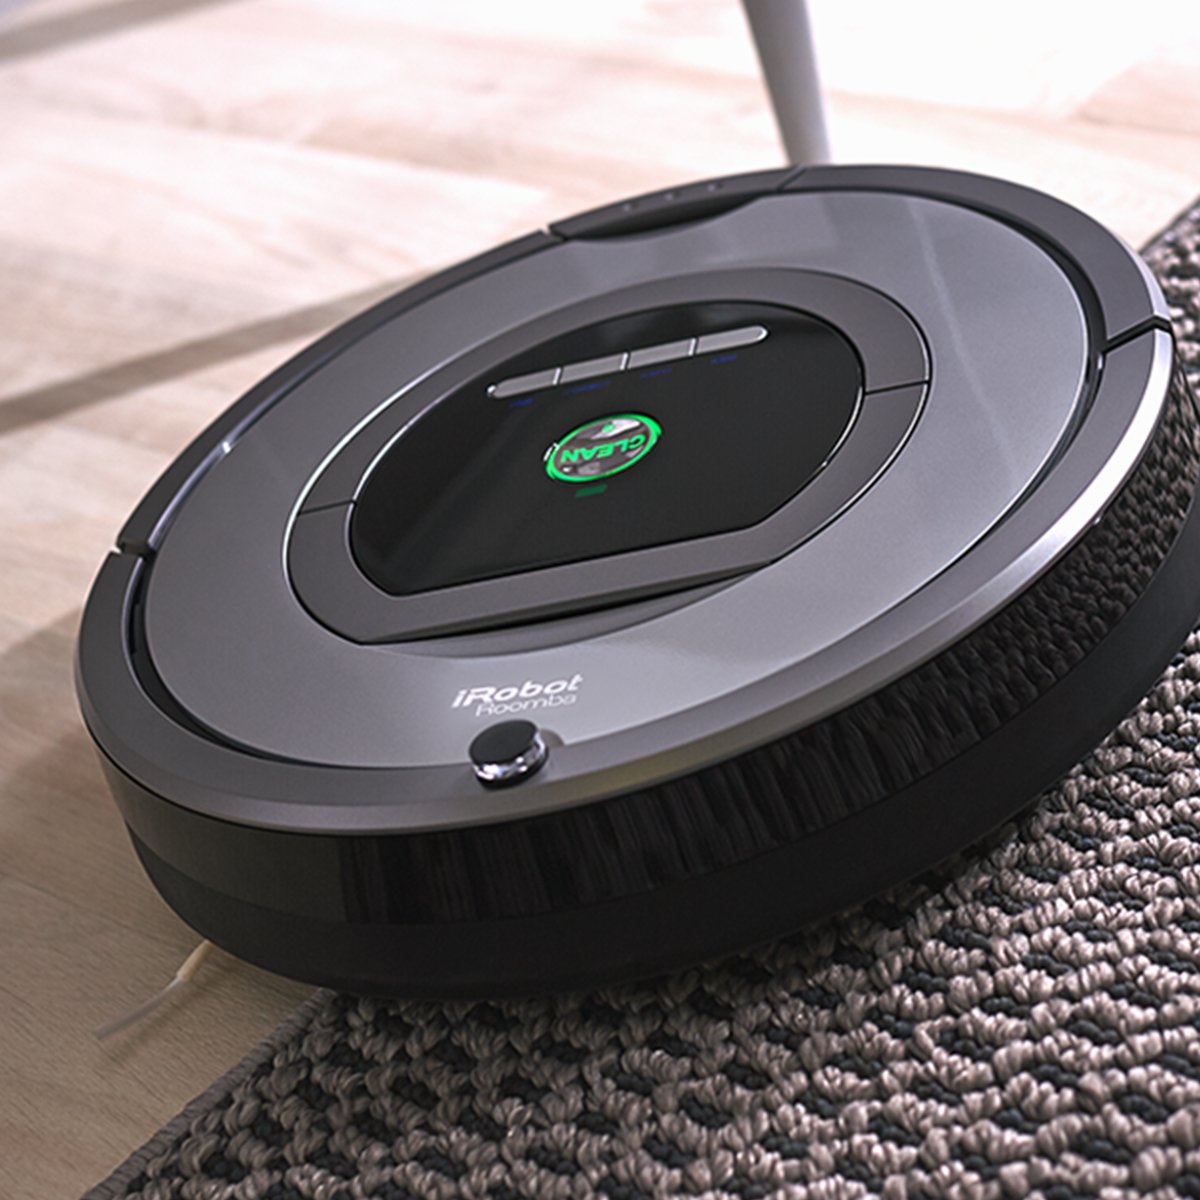 Foreman Tåre hav det sjovt QVC on Twitter: "Clean your floors with a touch of a button with the @iRobot  Roomba 761 ! Shop the #QVC2 #BIGDEAL for 24hrs now! &gt;  https://t.co/oao1fsqsHN https://t.co/uq8FnQ6NgI" / Twitter